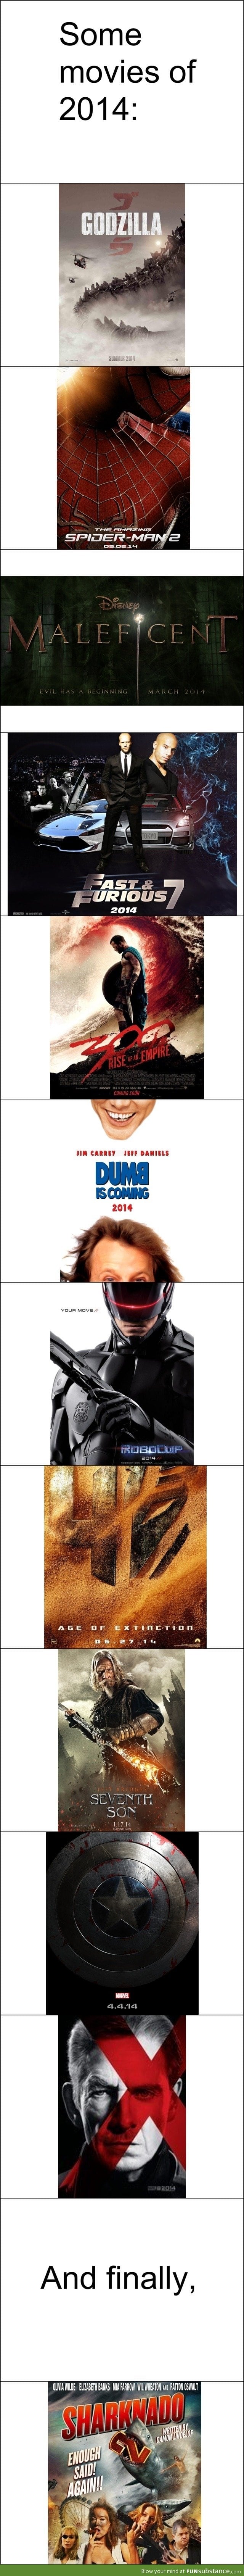 Movies to watch out for in 2014